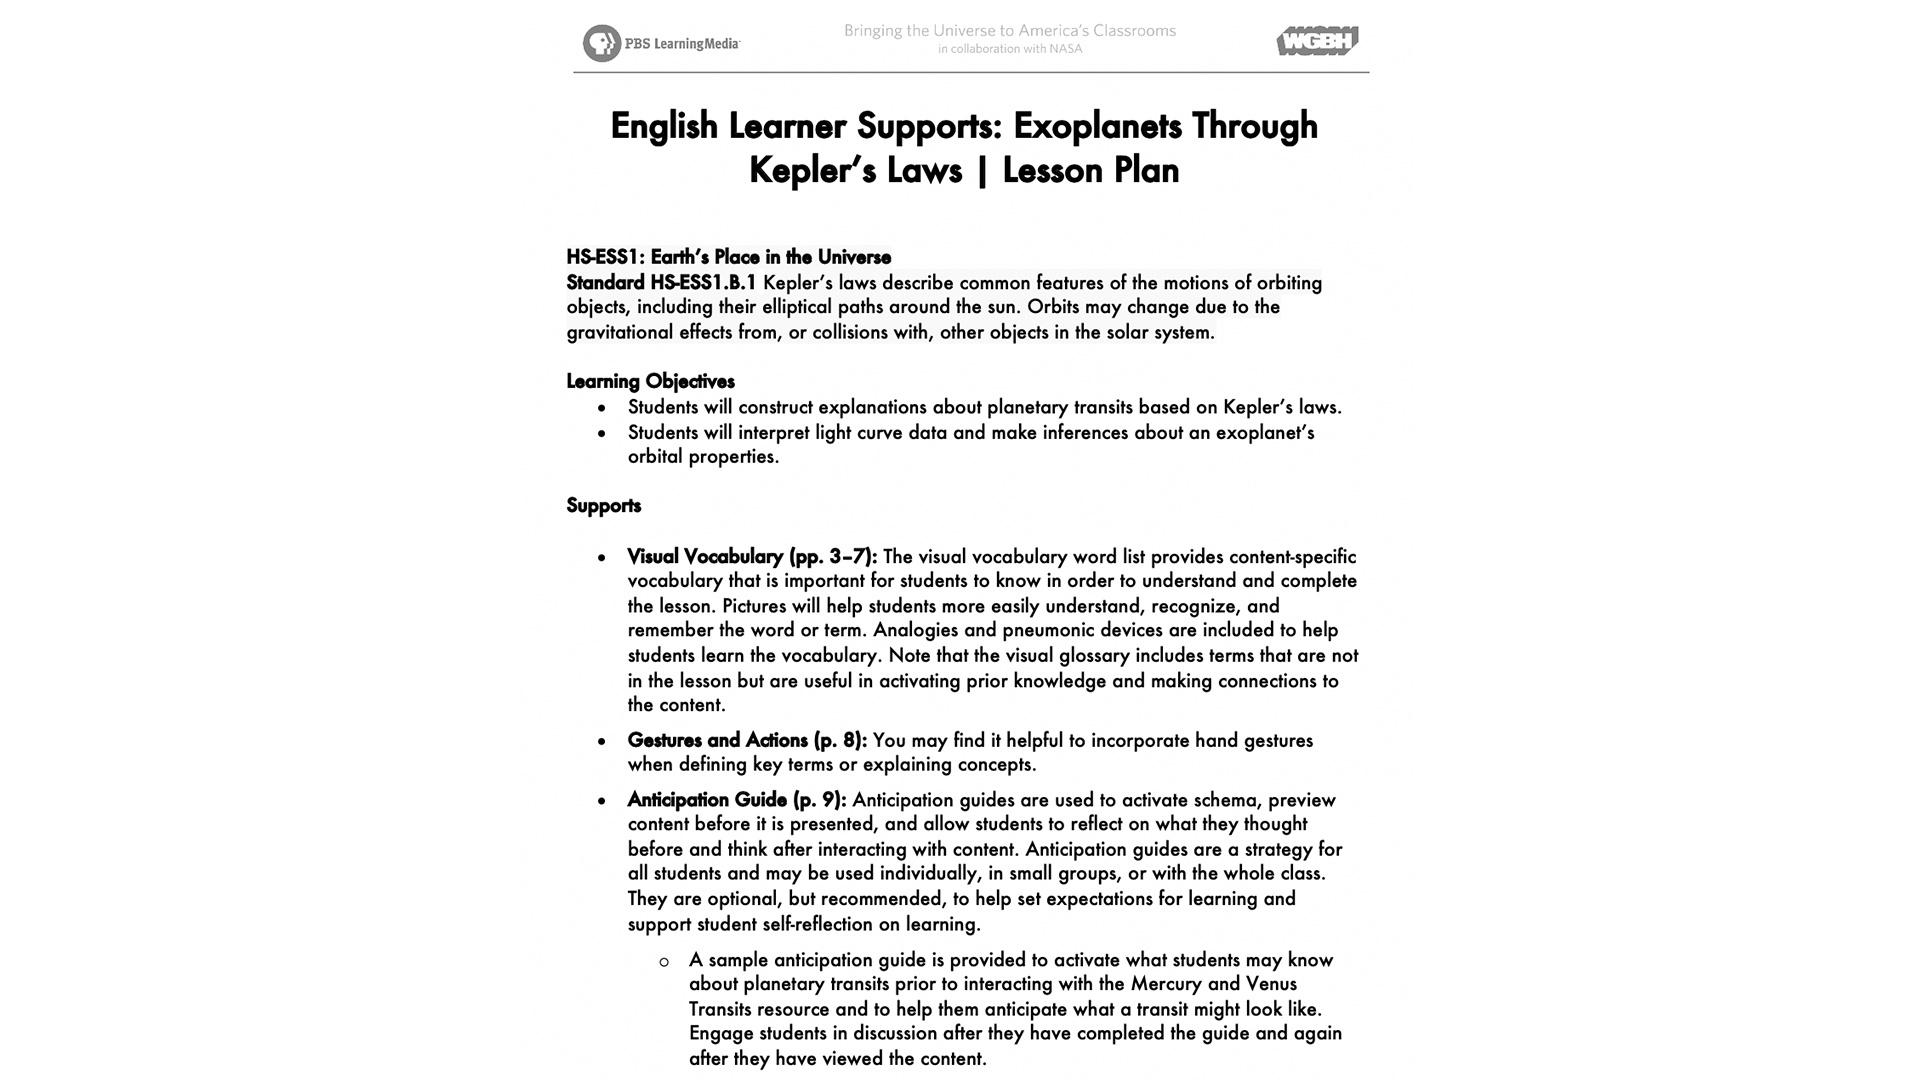 Exoplanets Through Keplers Laws Lesson Plan Pbs